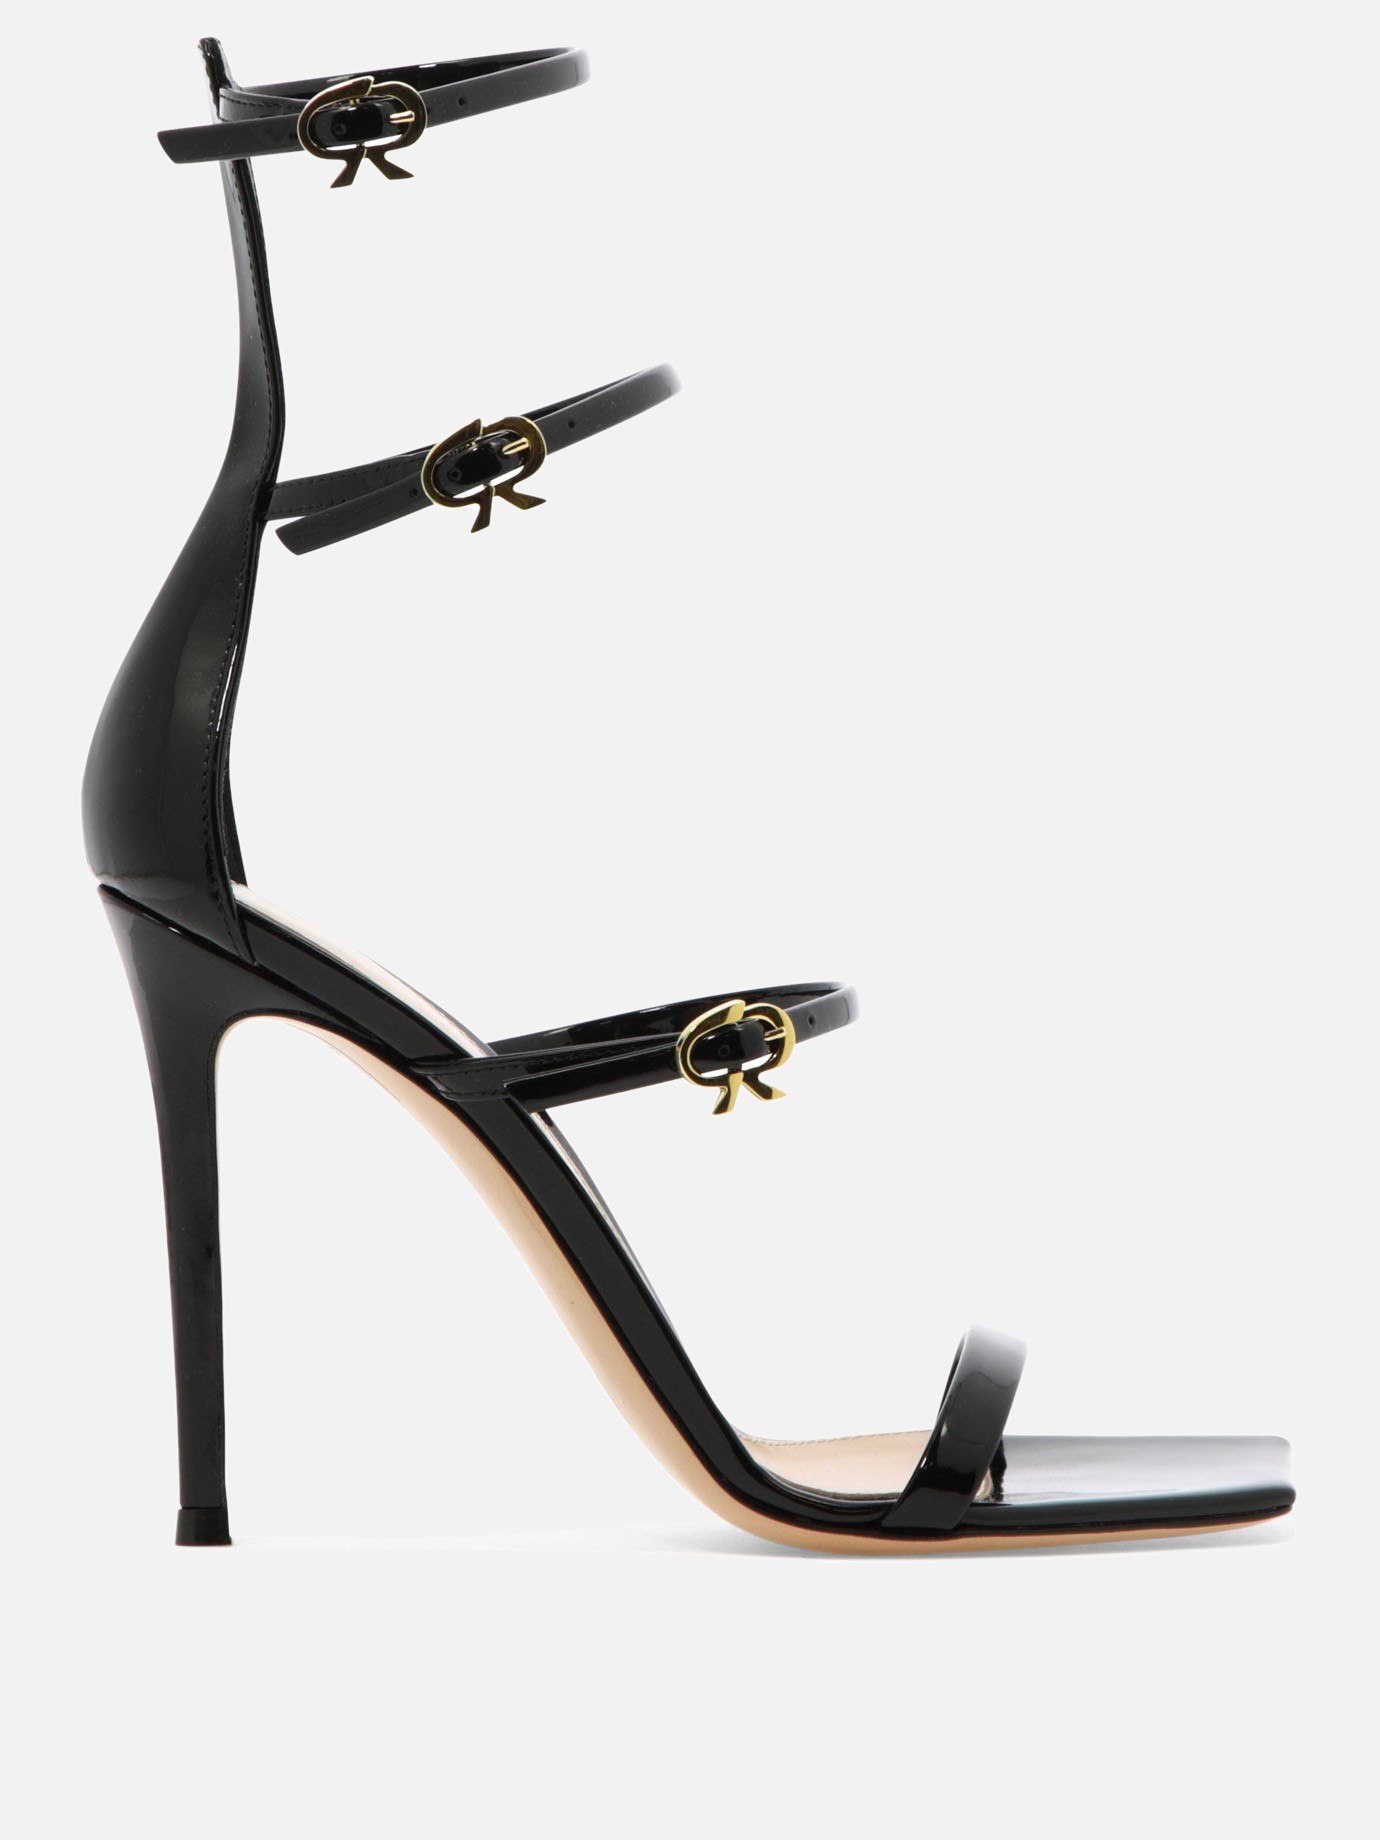  Ribbon Uptown  sandalsby Gianvito Rossi - 3